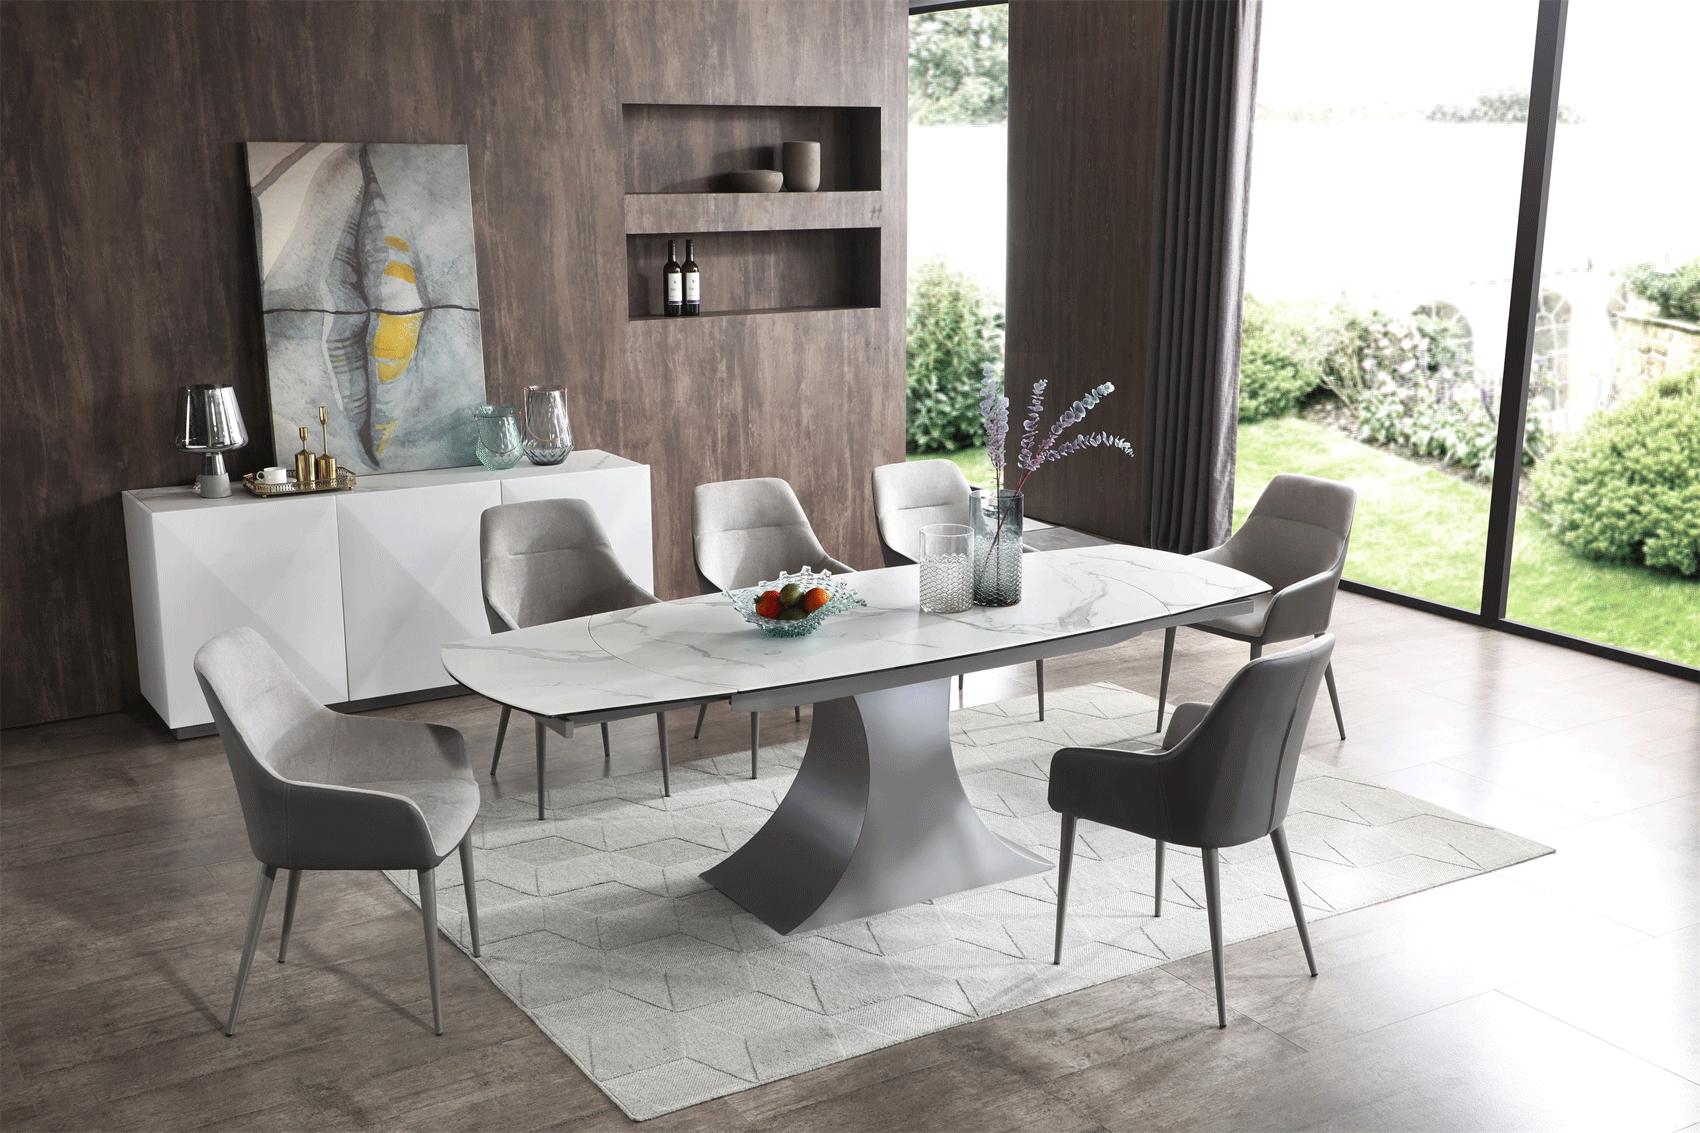 Contemporary Dining Table Set 9035DININGTABLE 9035DININGTABLE-6PC in Gray Fabric